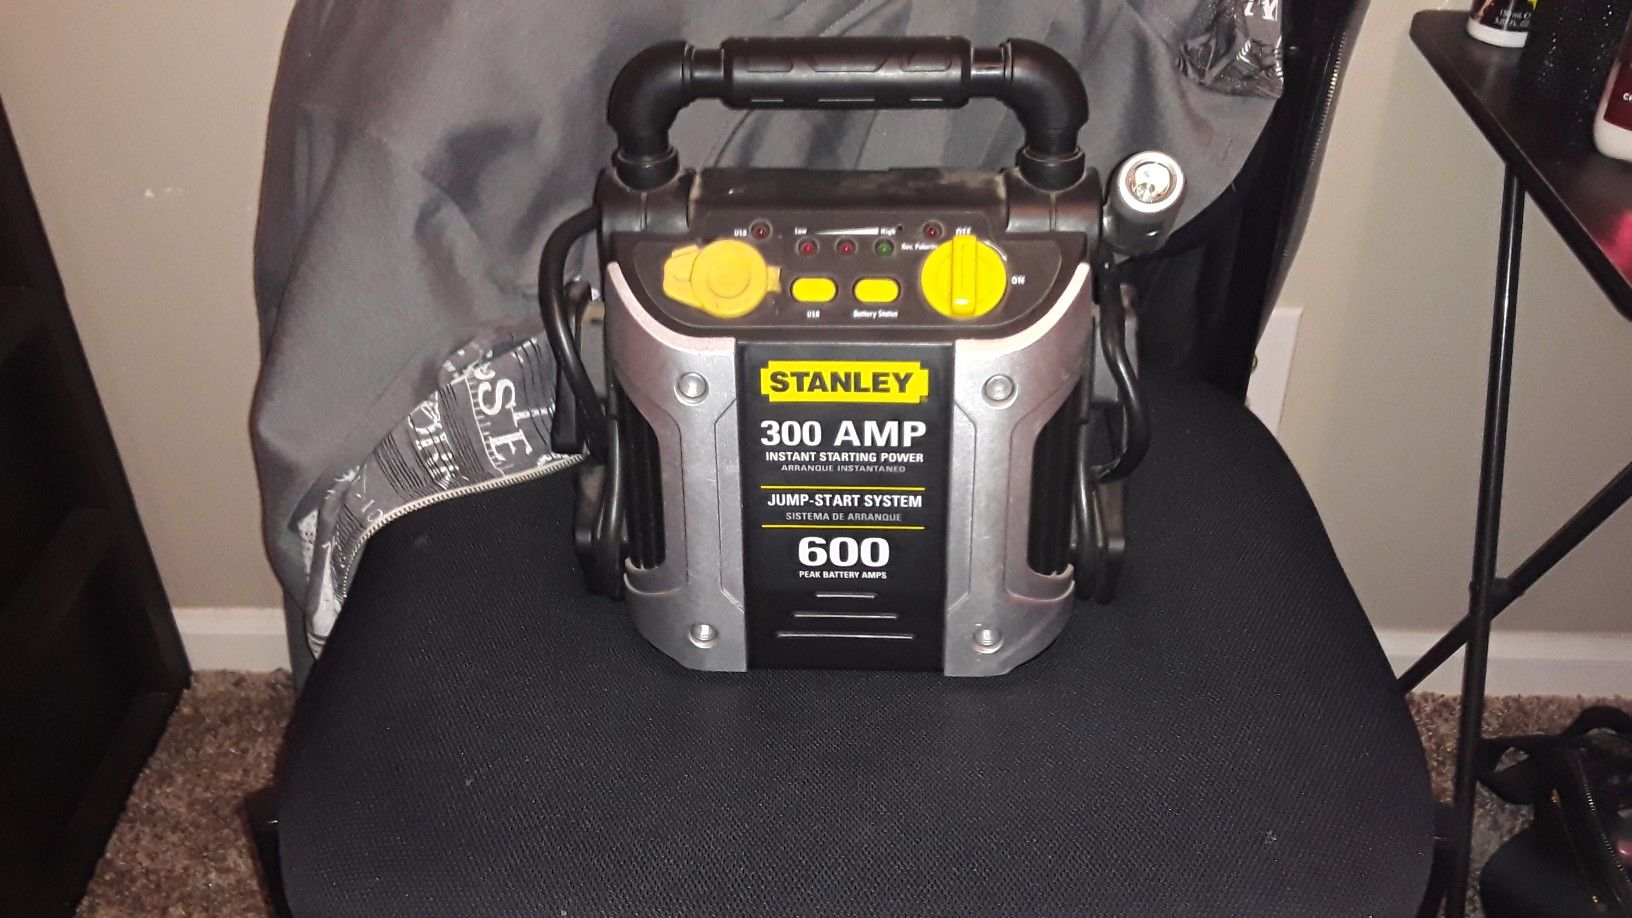 Stainly 300 amp battery pack